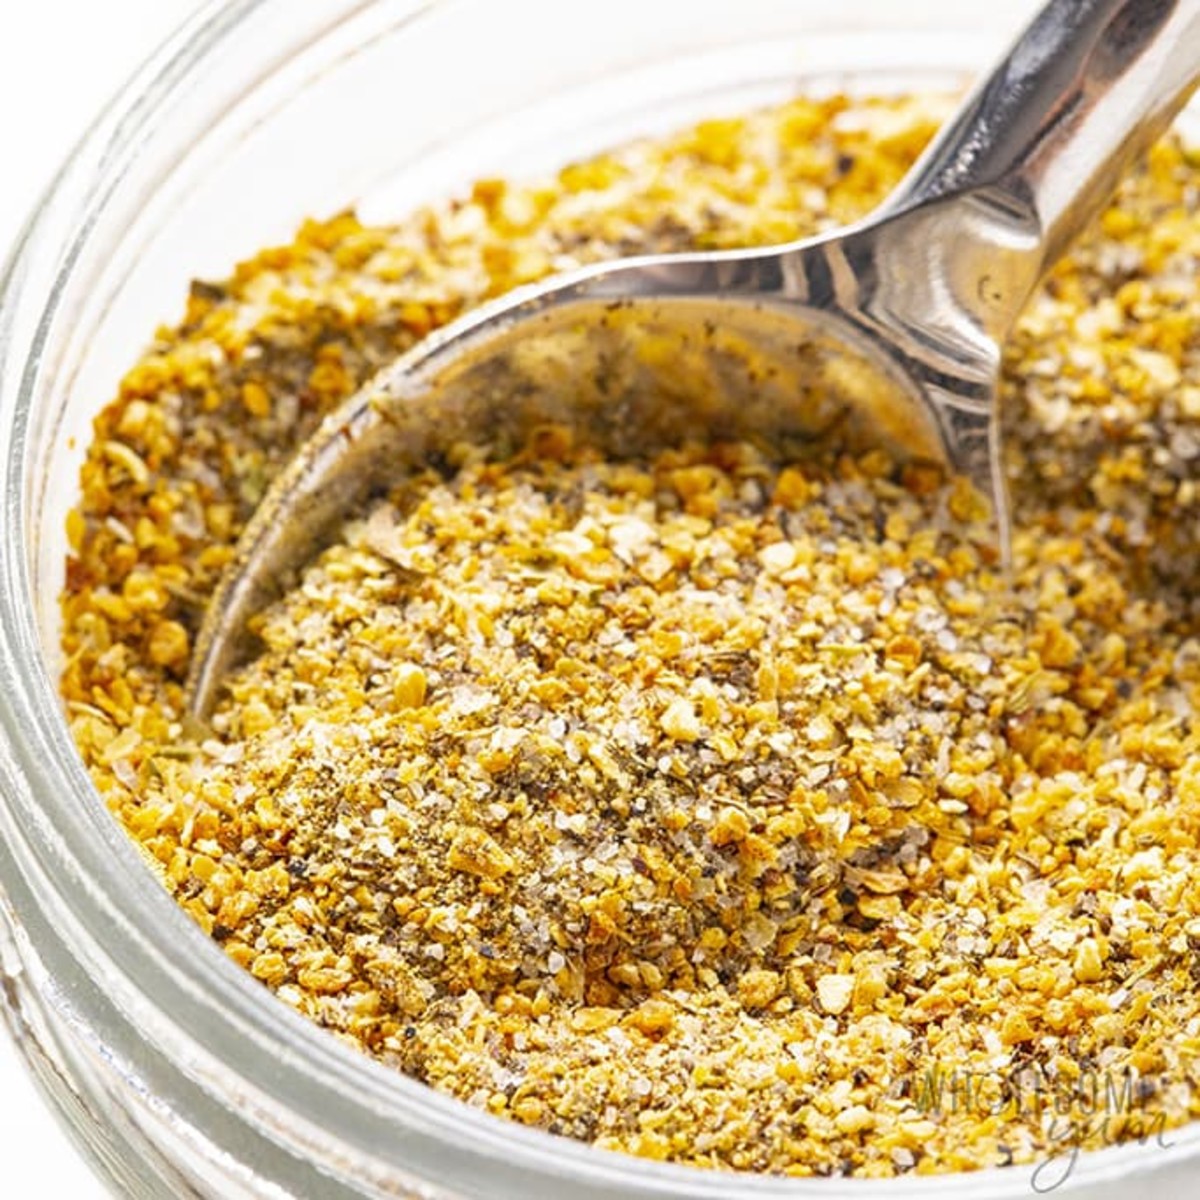 Lemon Pepper: All You Need to Know